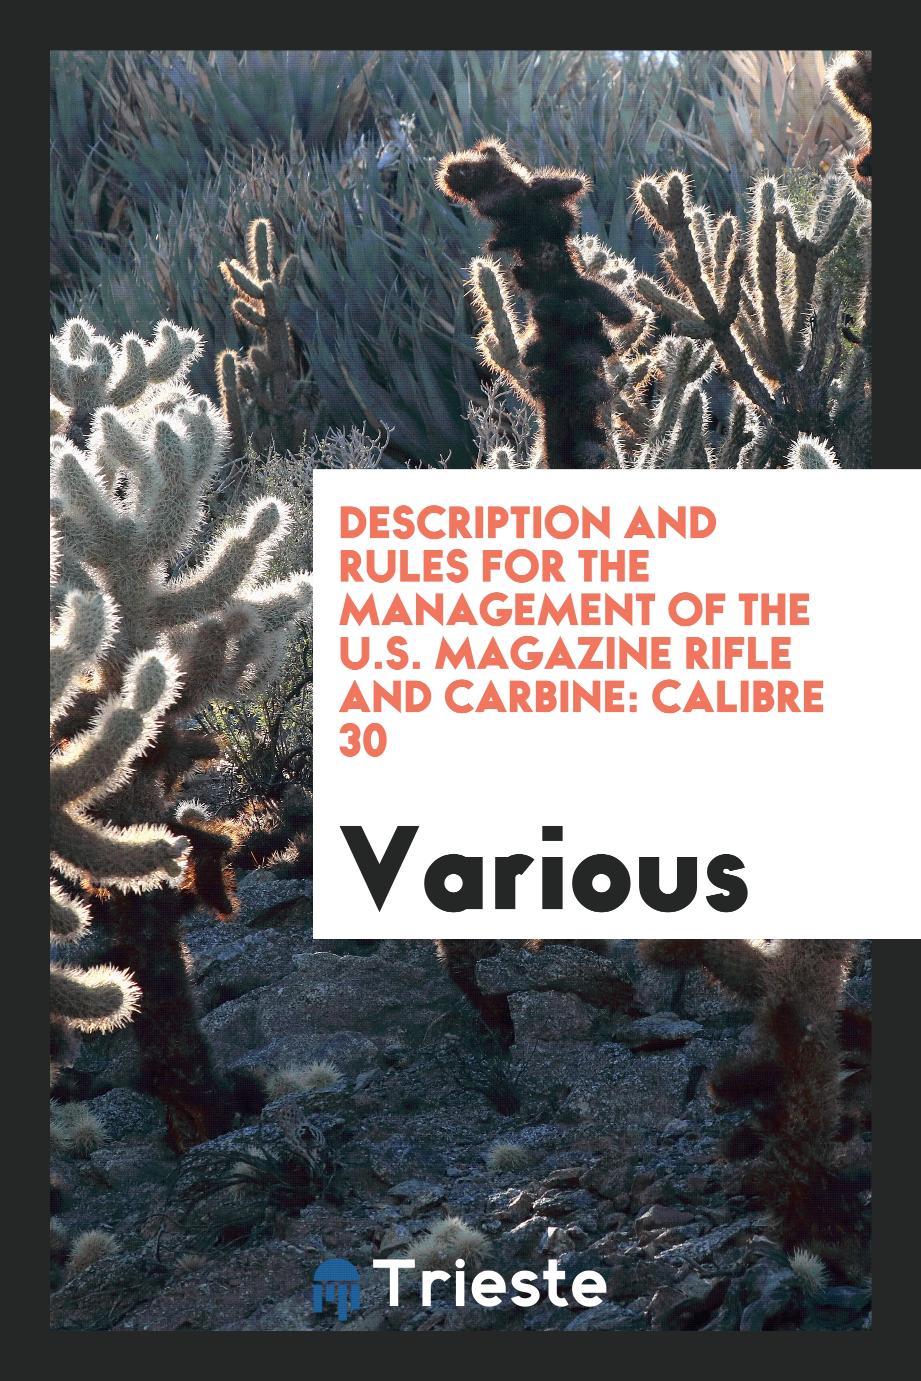 Description and Rules for the Management of the U.S. Magazine Rifle and Carbine: Calibre 30